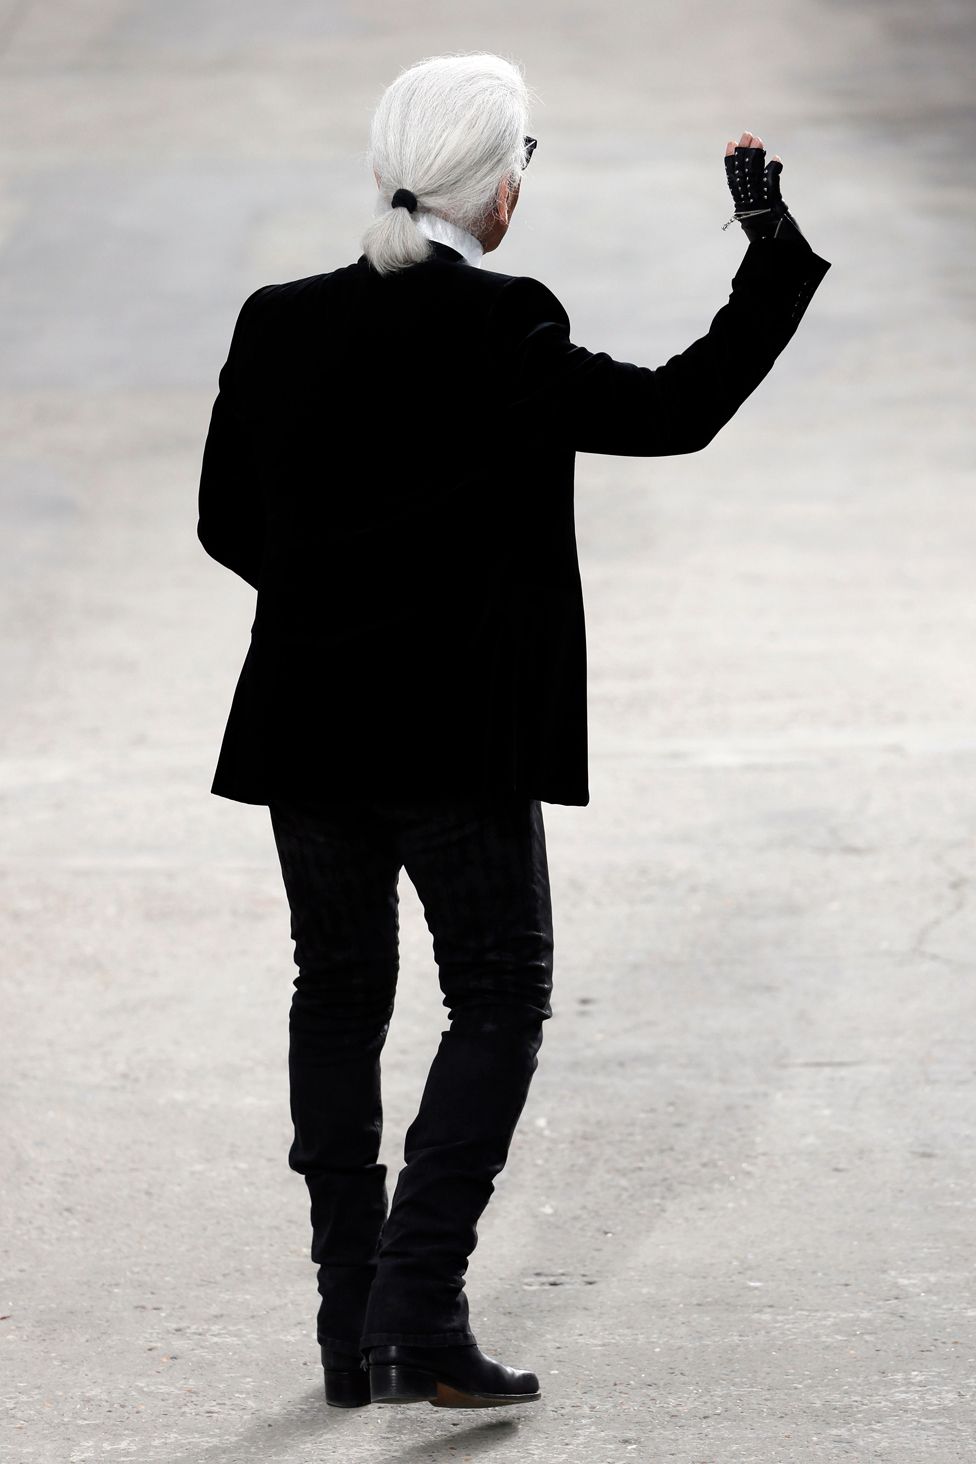 German fashion designer Karl Lagerfeld for Chanel acknowledges the public at the end of his 2014 Spring/Summer ready-to-wear collection fashion show at the Grand Palais in Paris.